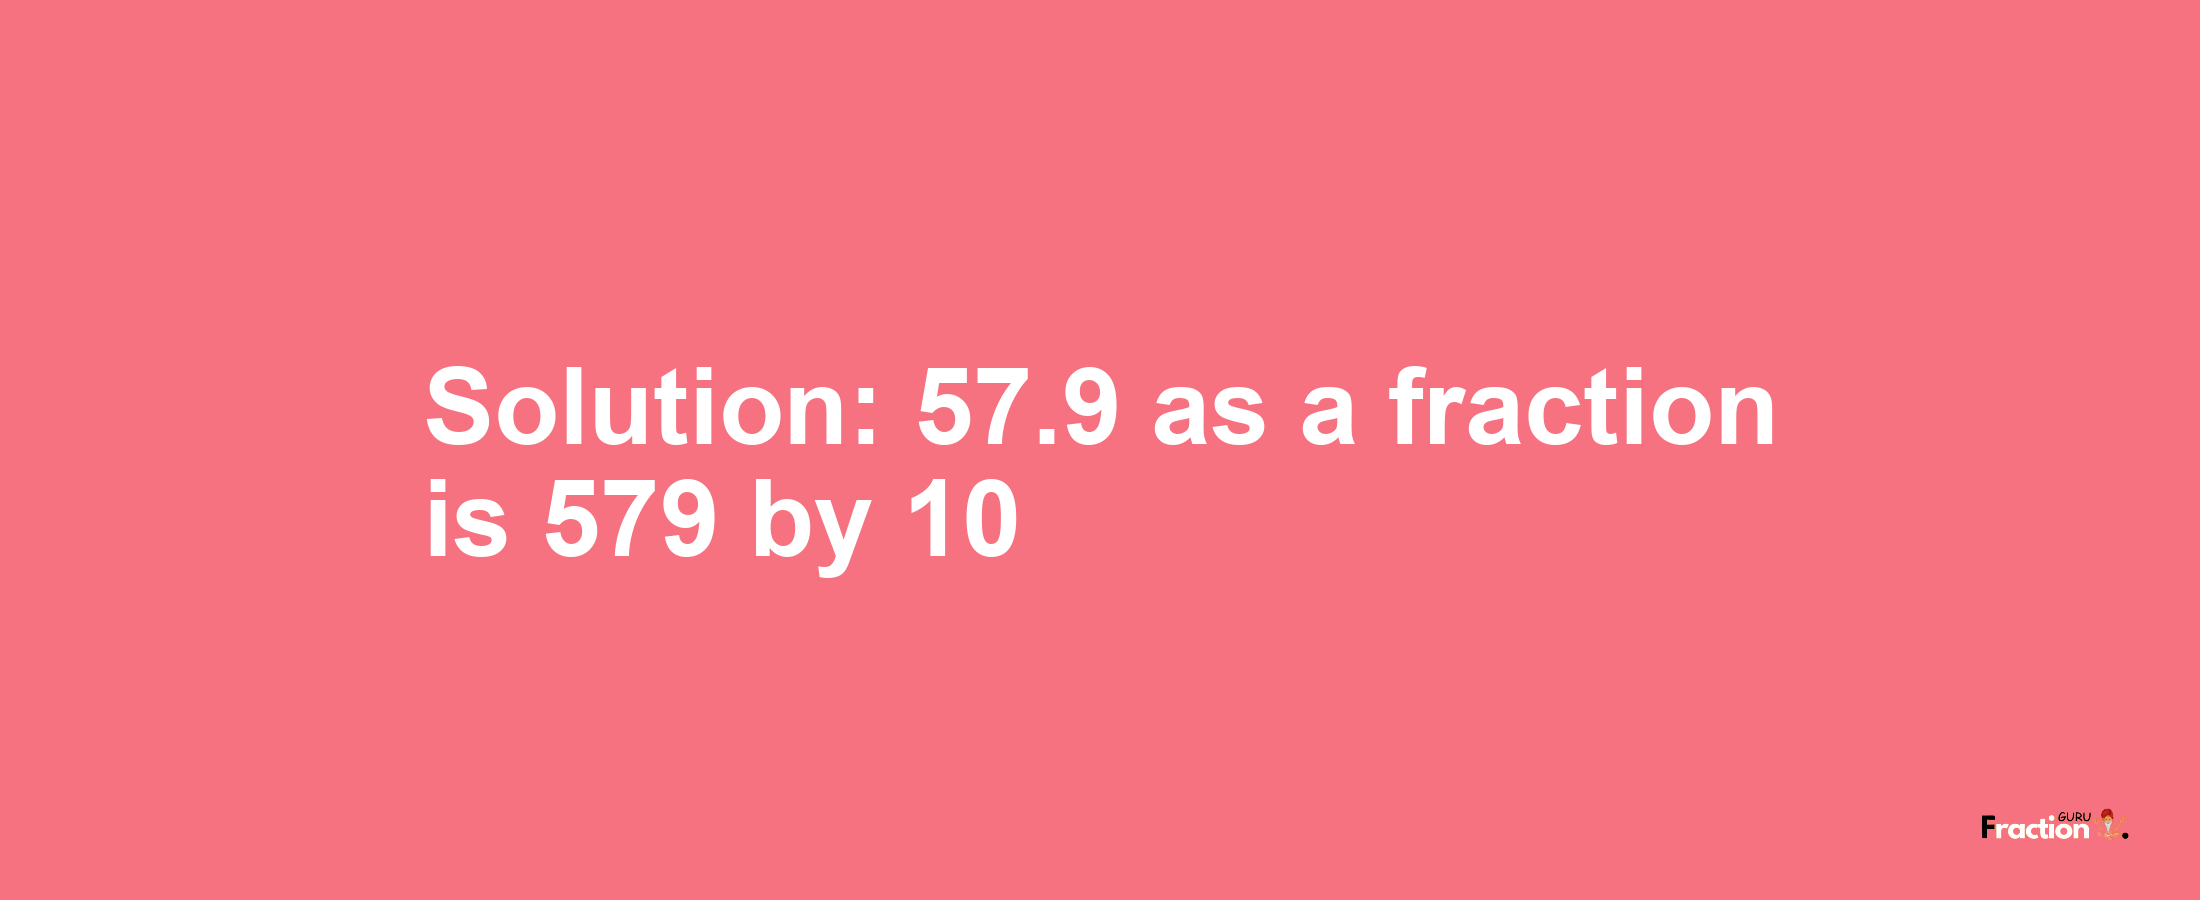 Solution:57.9 as a fraction is 579/10